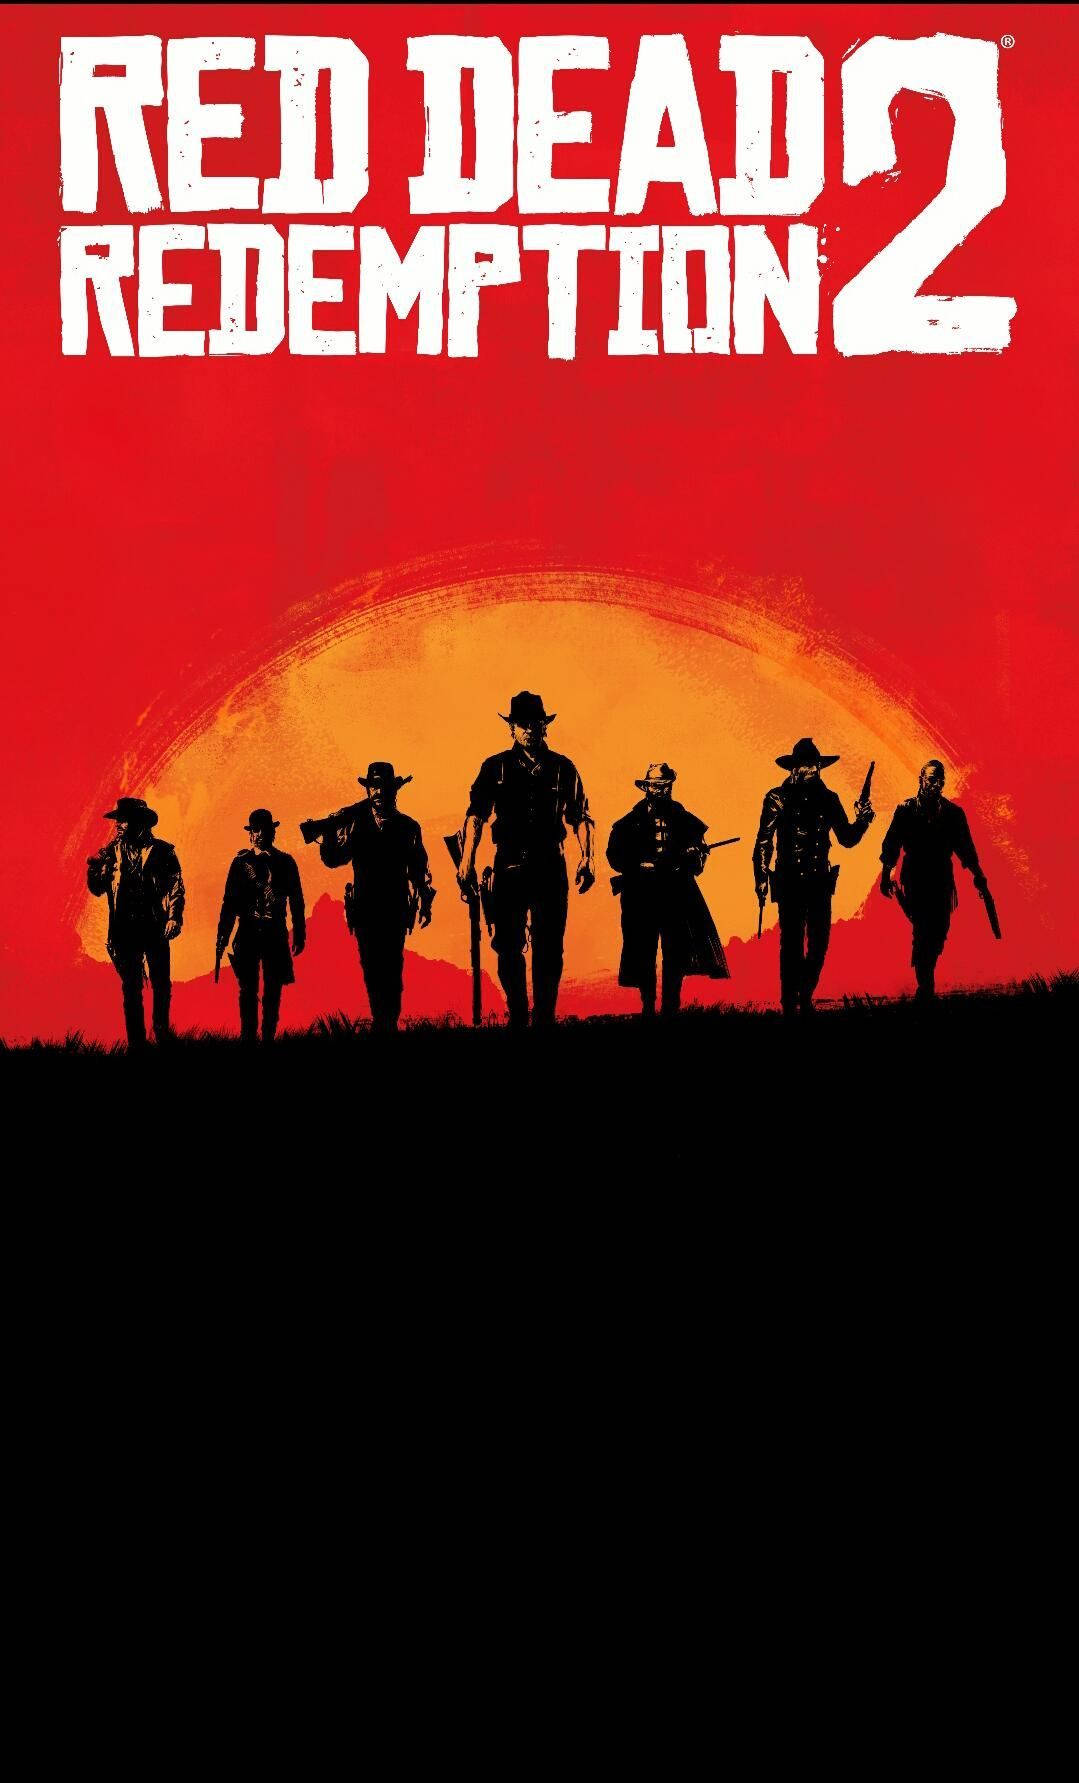 Made A Rdr2 Mobile Wallpaper For You Guys. Latestgames Wallpaper